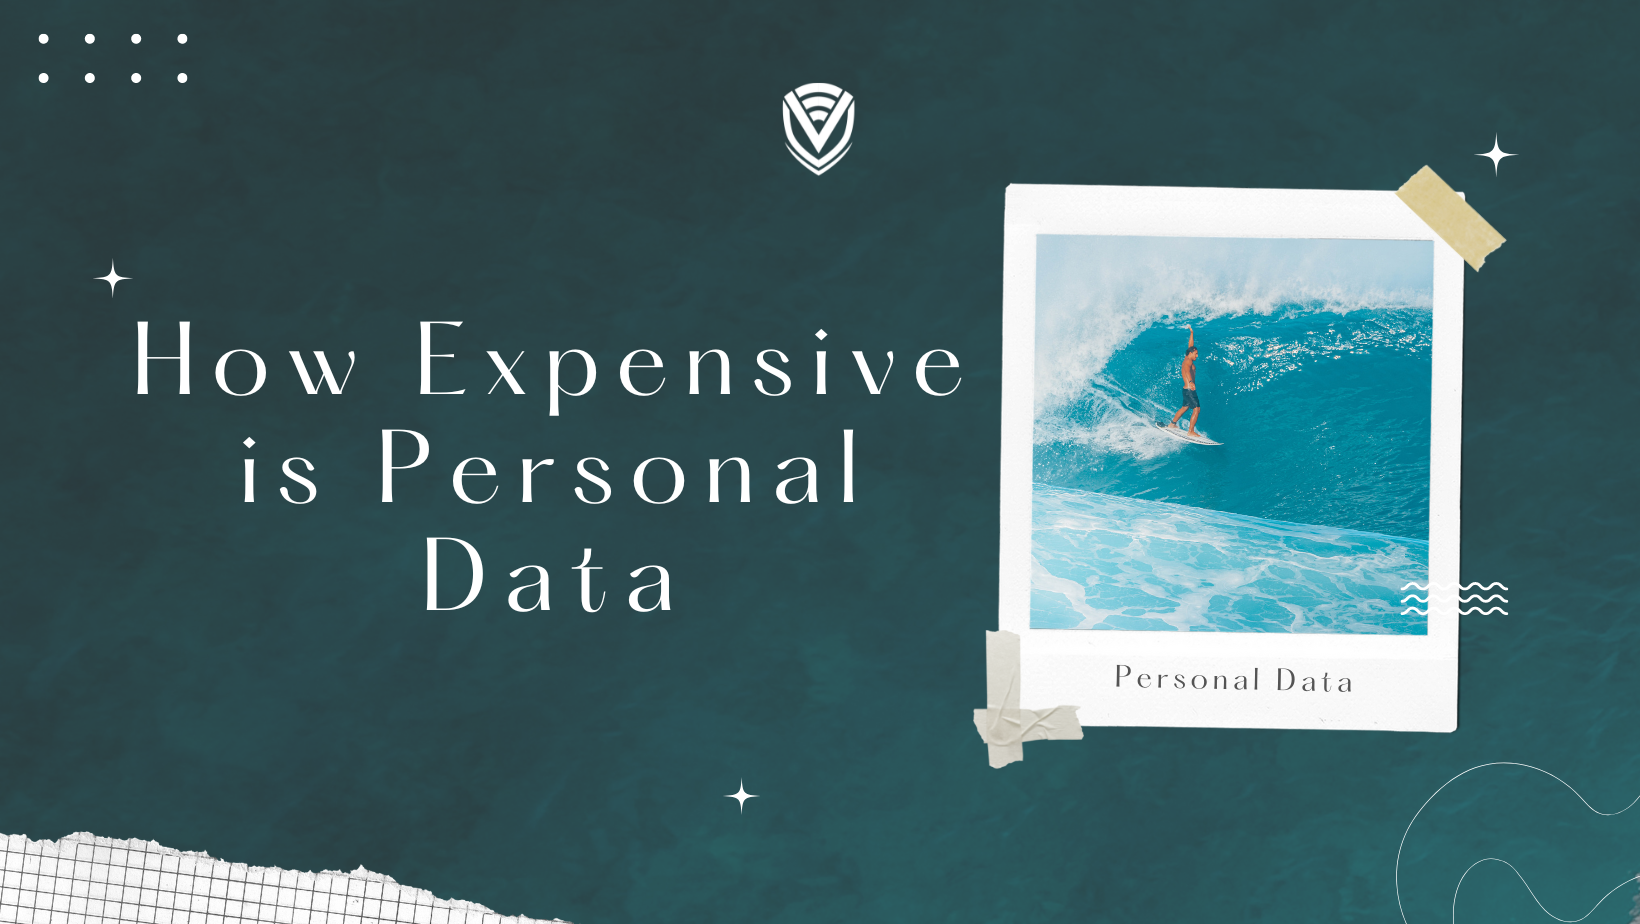 How Expensive is Personal Data